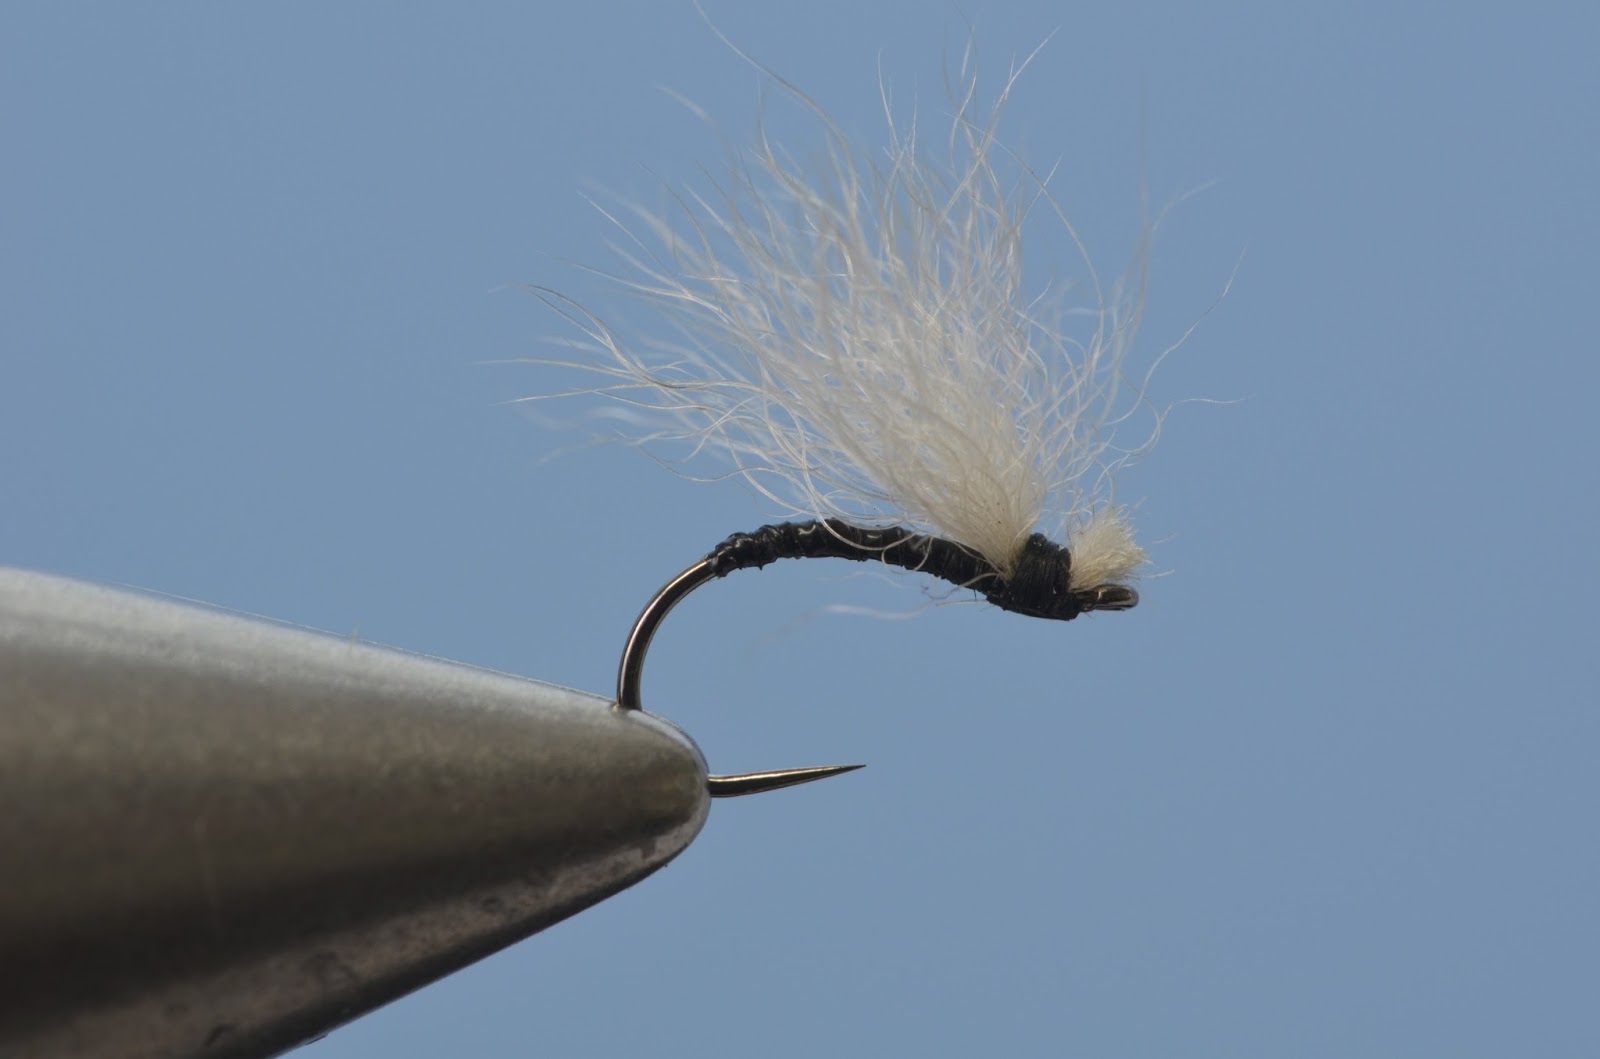 Catching Shadows - Winter Small Fly Tying And Fishing Tips